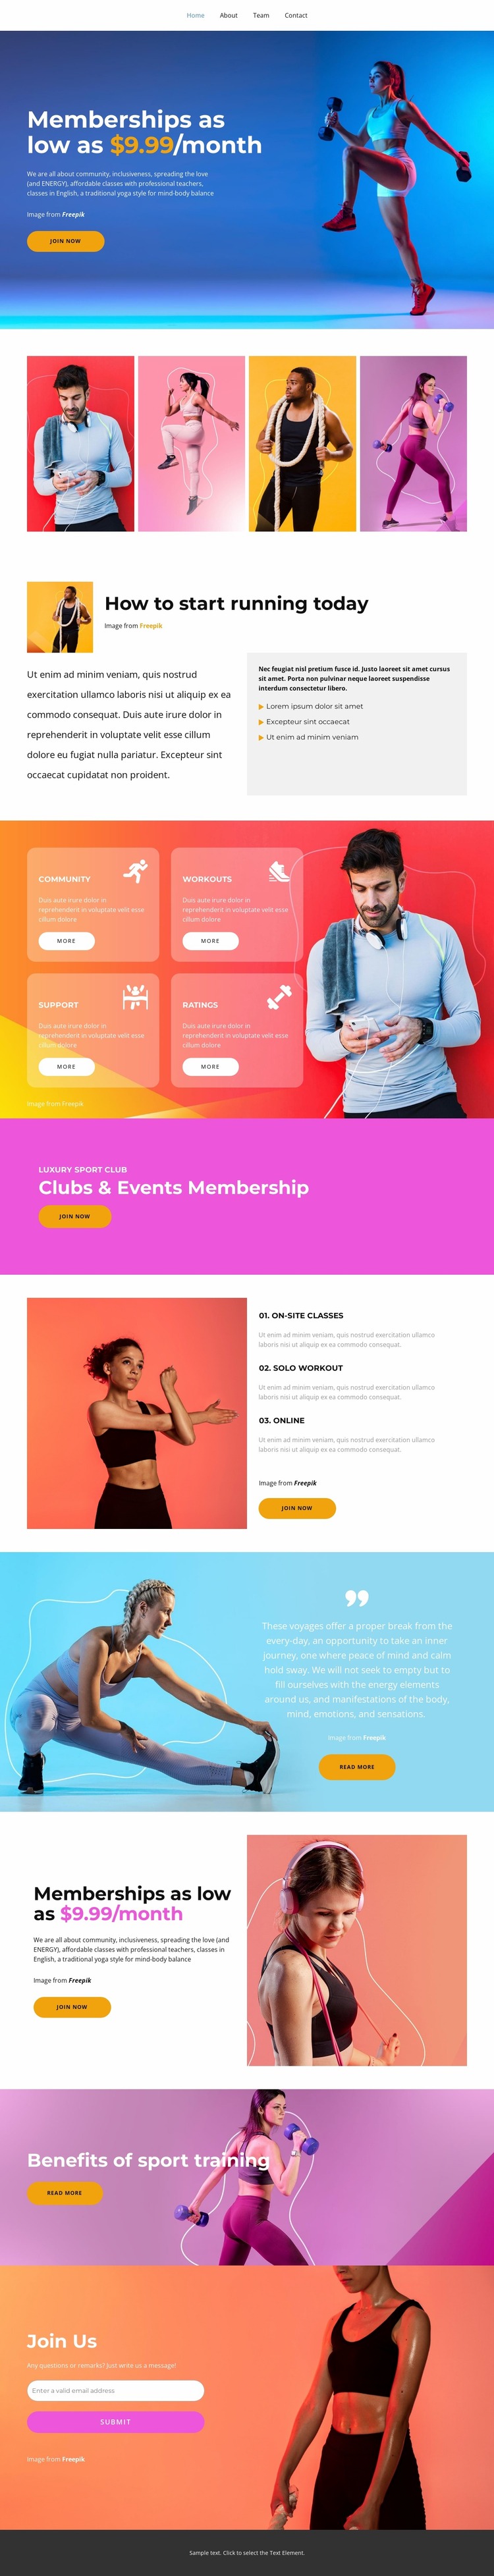 We are a sport club Website Mockup